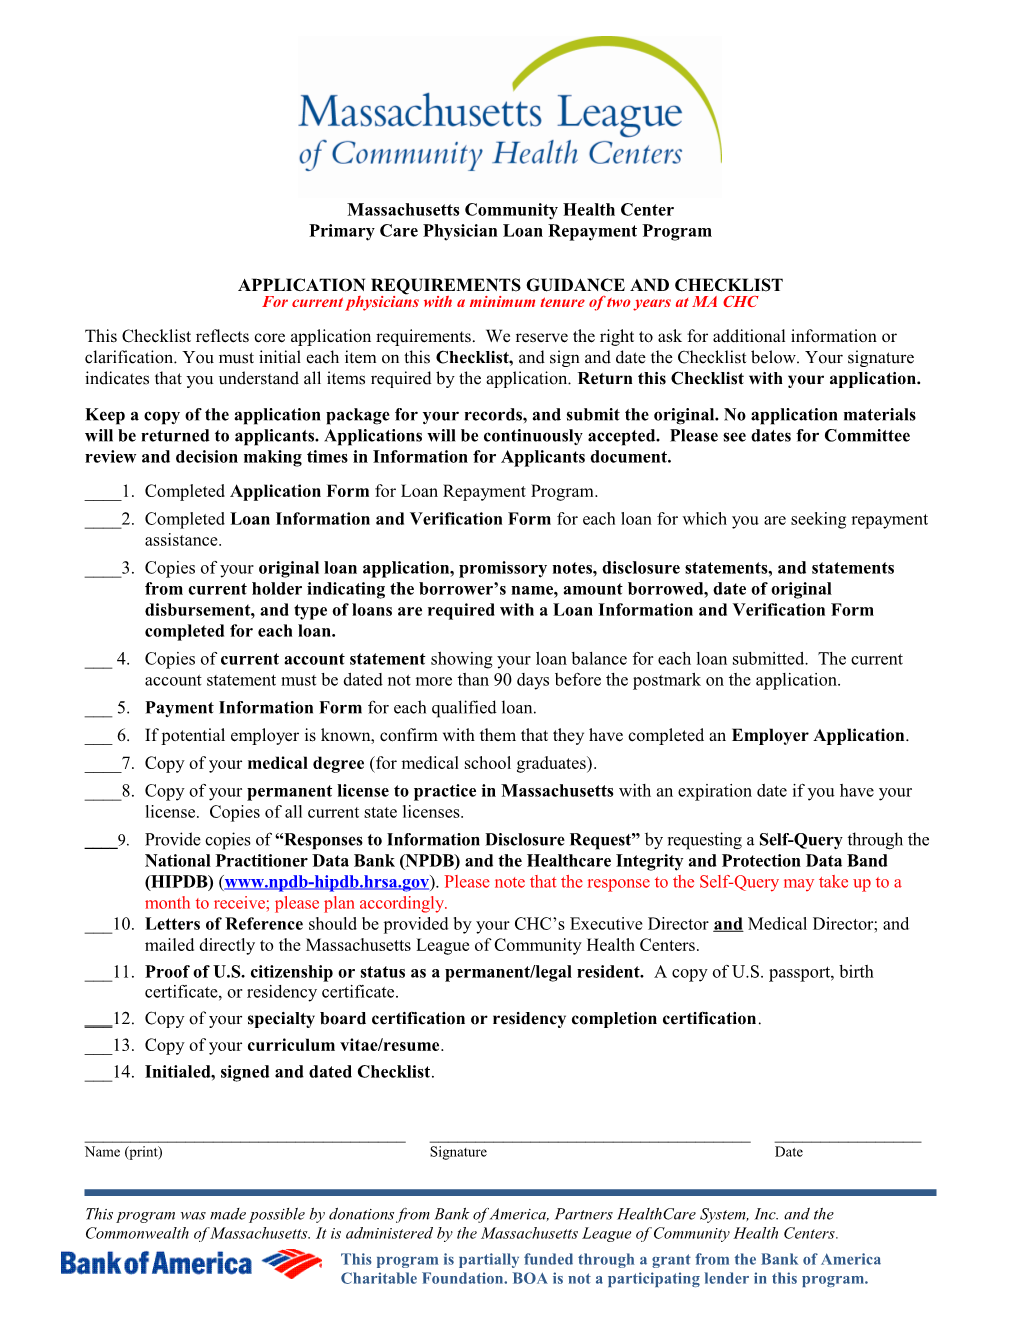 Primary Care Physician Loan Repayment Program